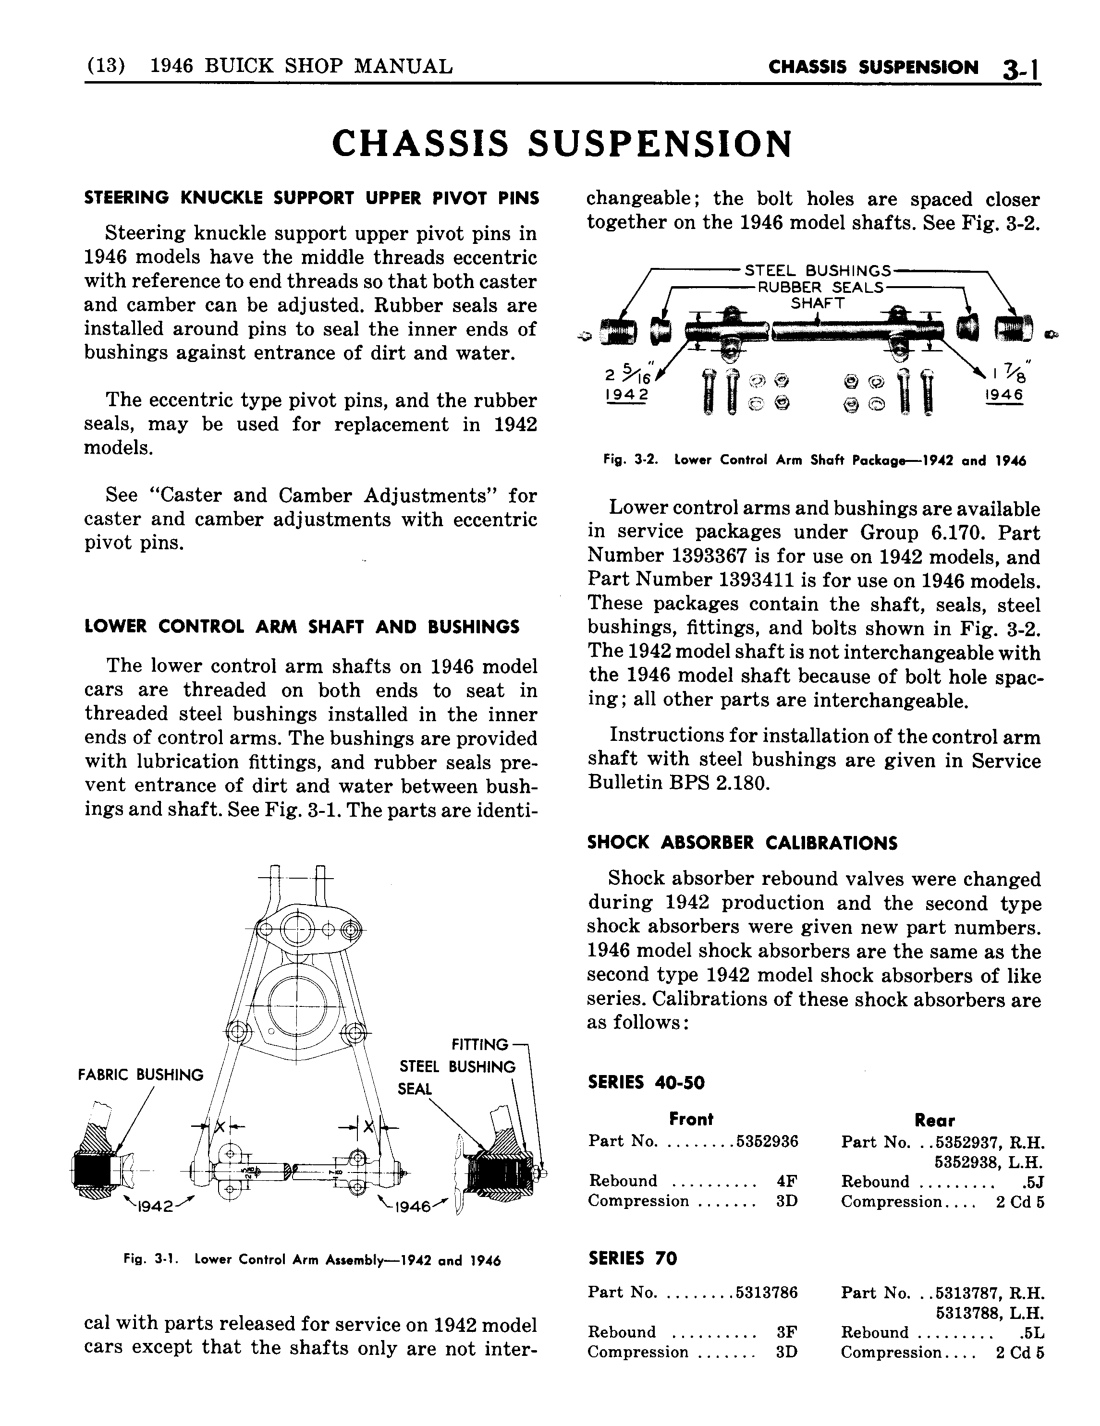 n_04 1946 Buick Shop Manual - Chassis Suspension-001-001.jpg